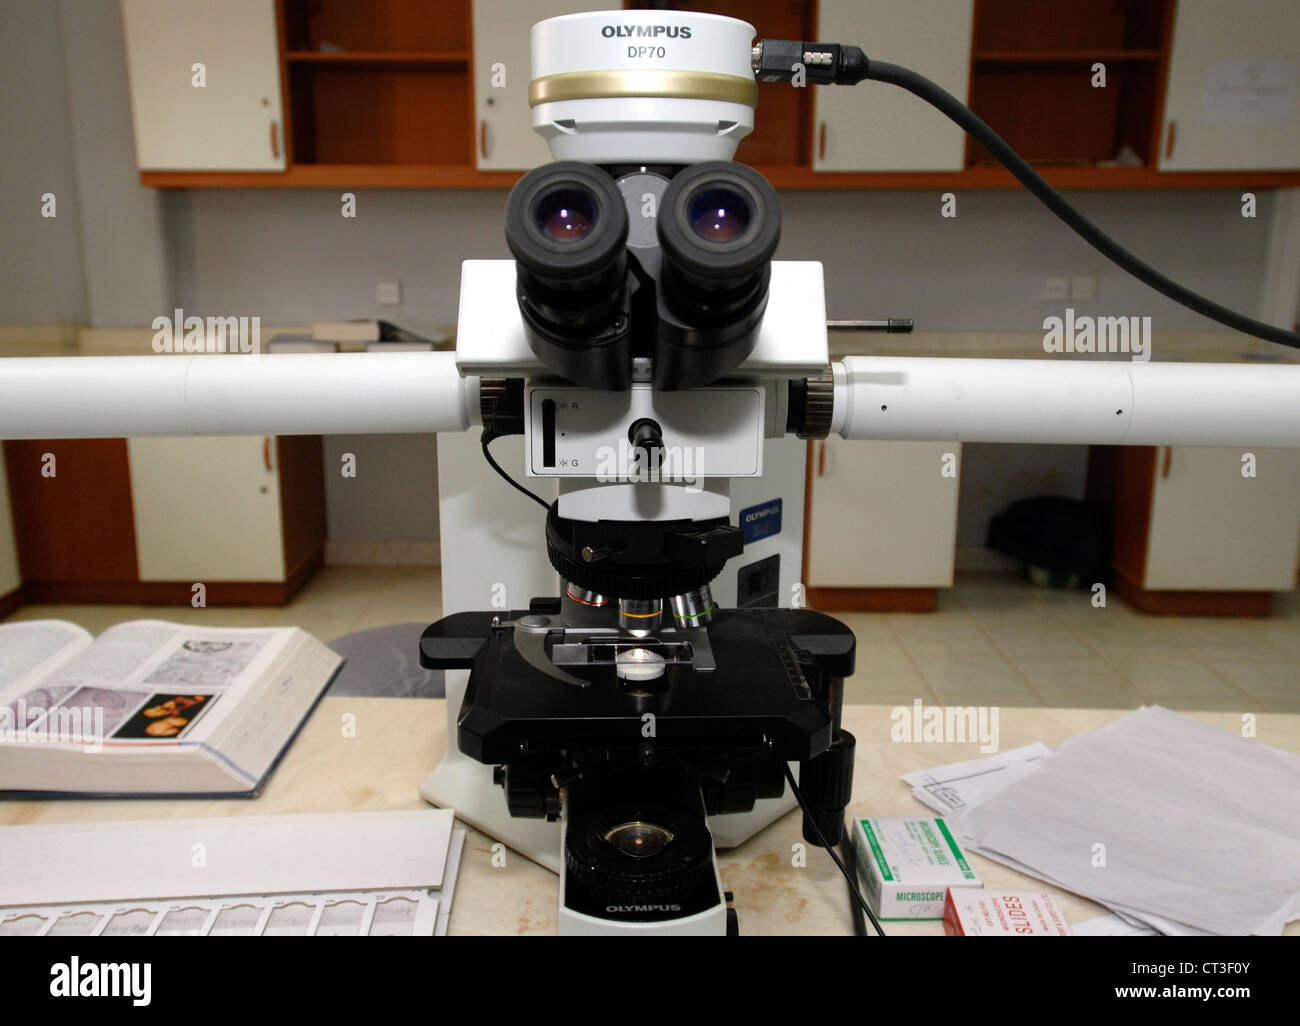 A microscope set on x100 magnification. Stock Photo